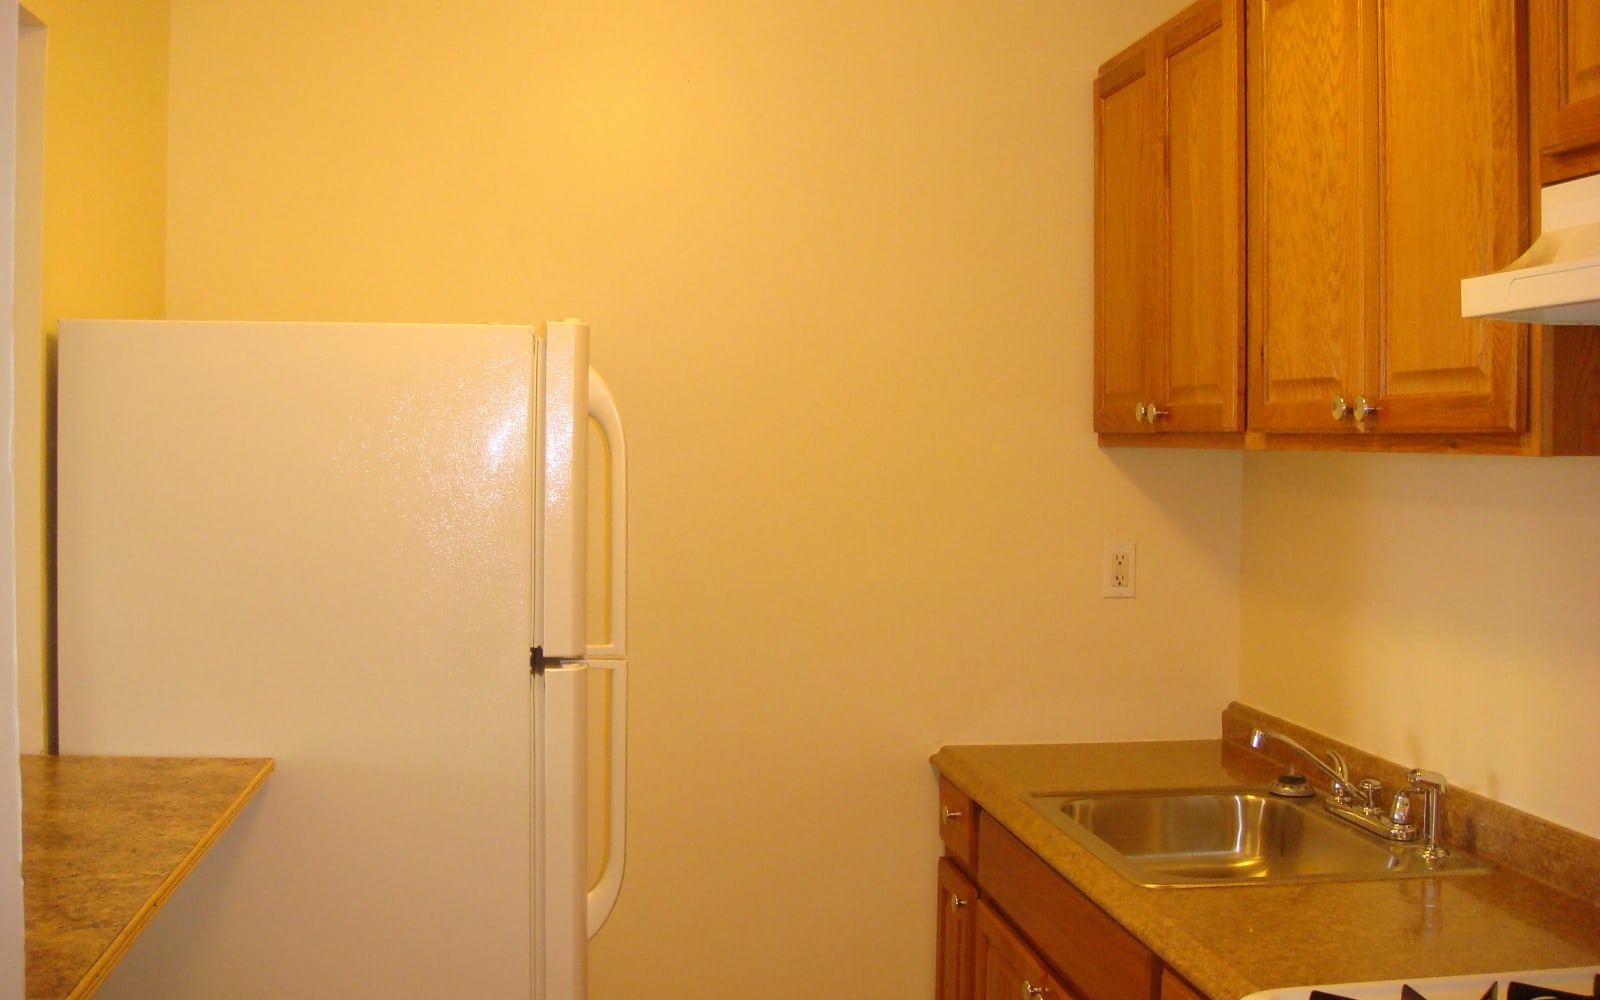 Refrigerator in the kitchen at DELETED - Ellsworth Apartments in Bridgeport, Connecticut